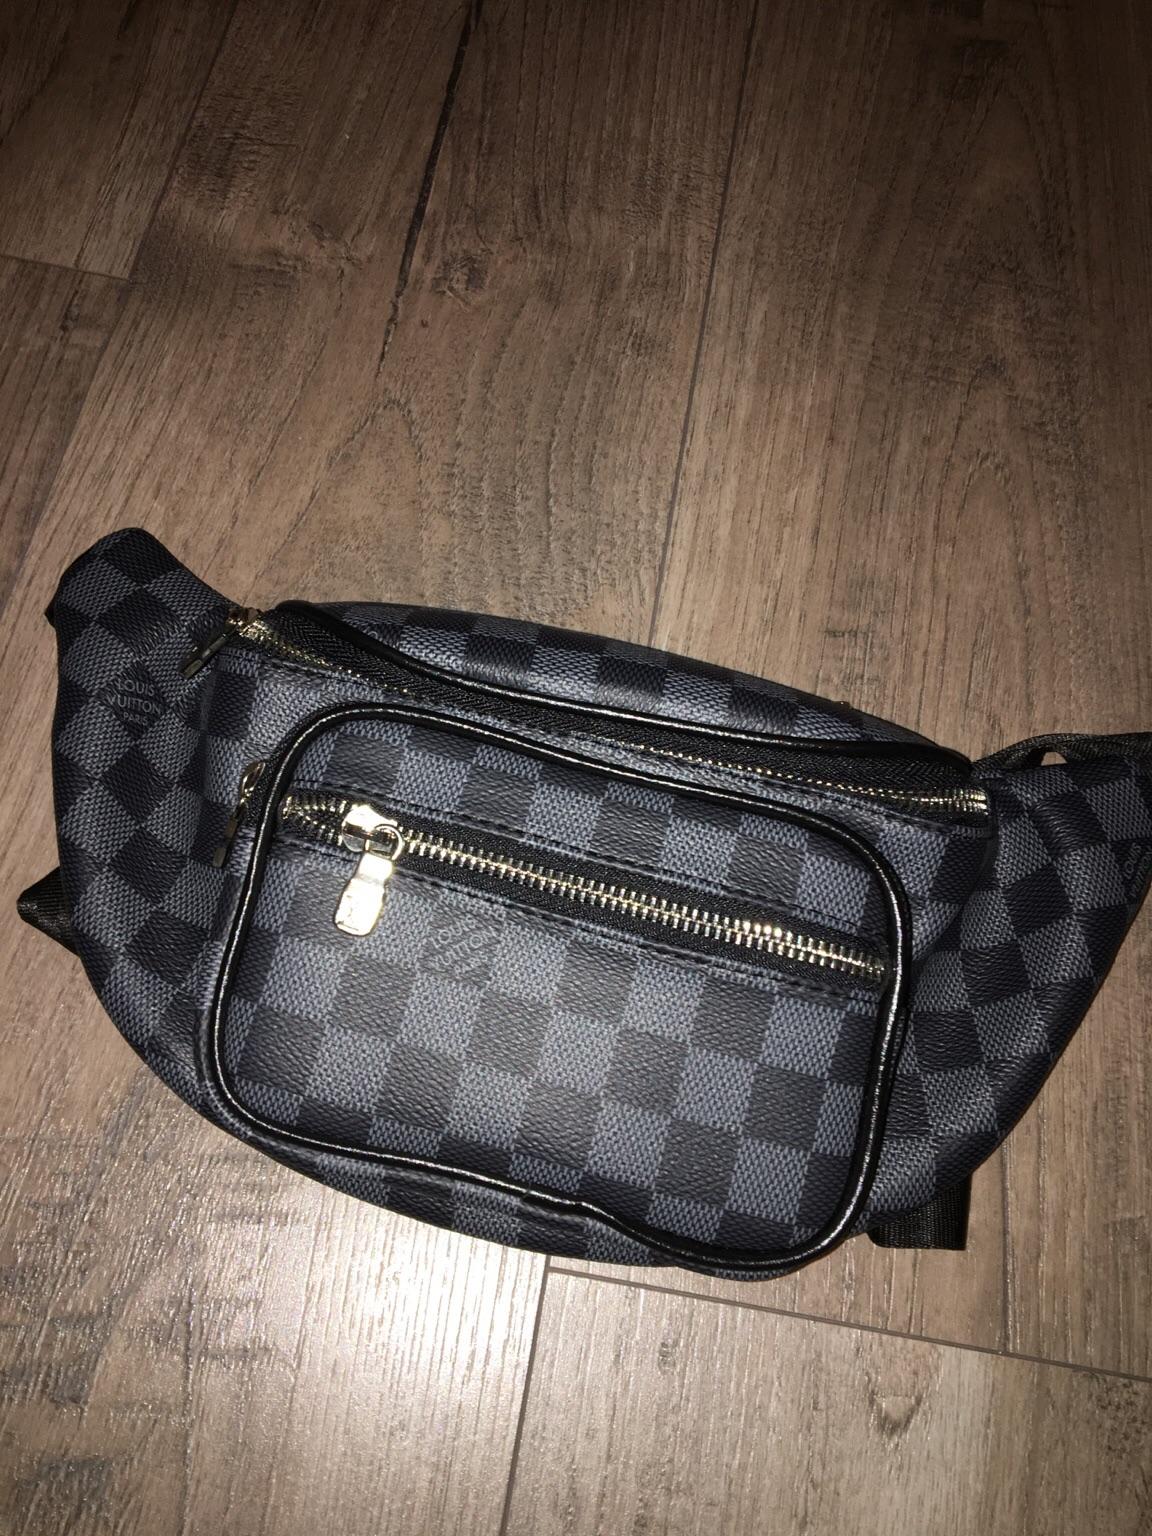 Louis Vuitton bauchtasche in 42119 Wuppertal for €35.00 for sale